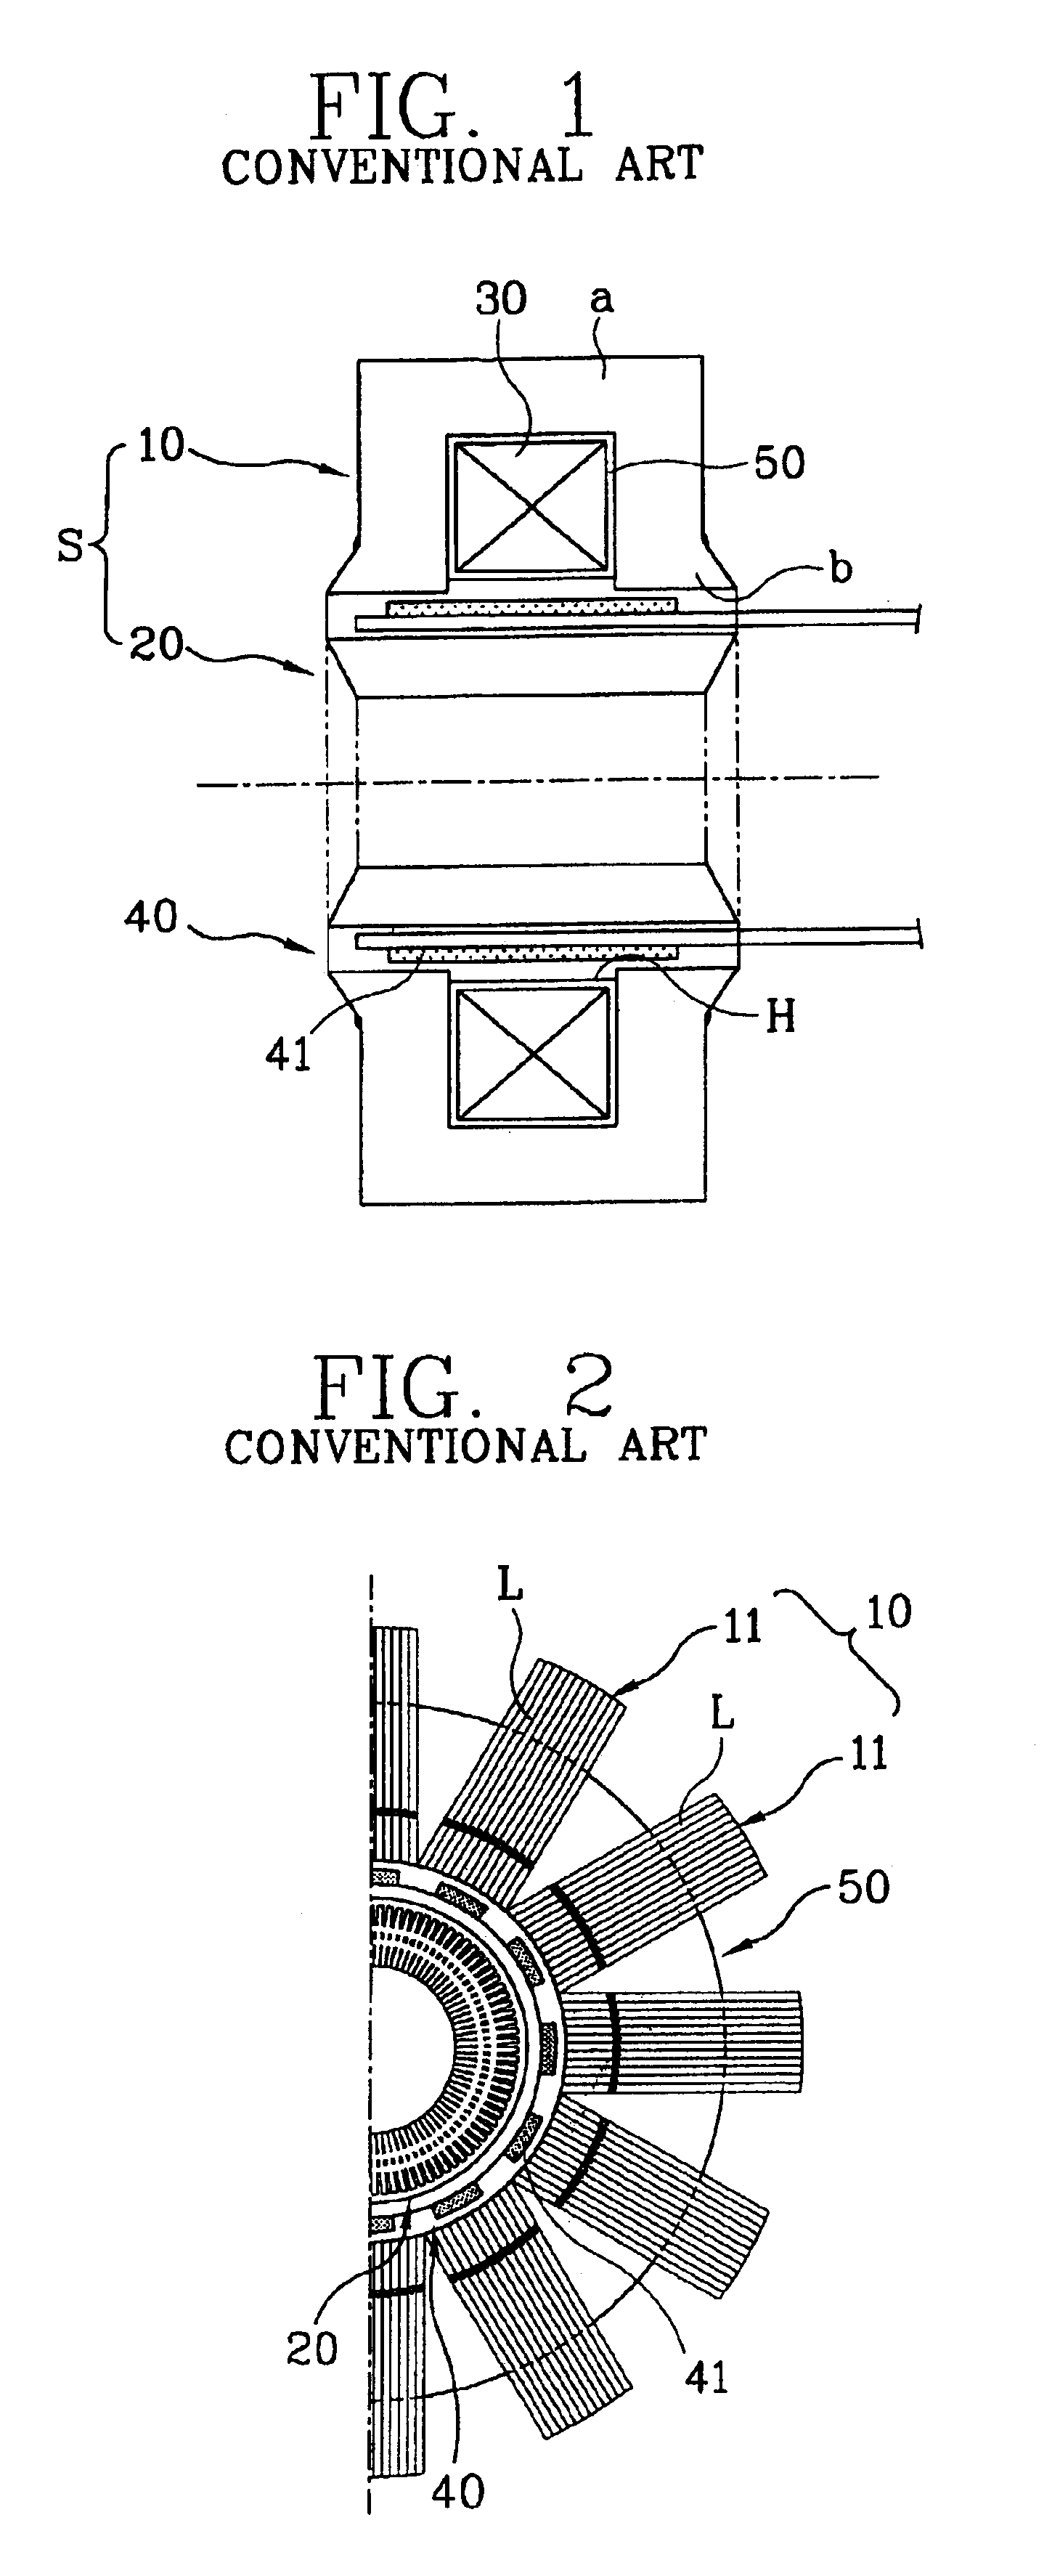 Lamination sheet and core lamination structure of a motor